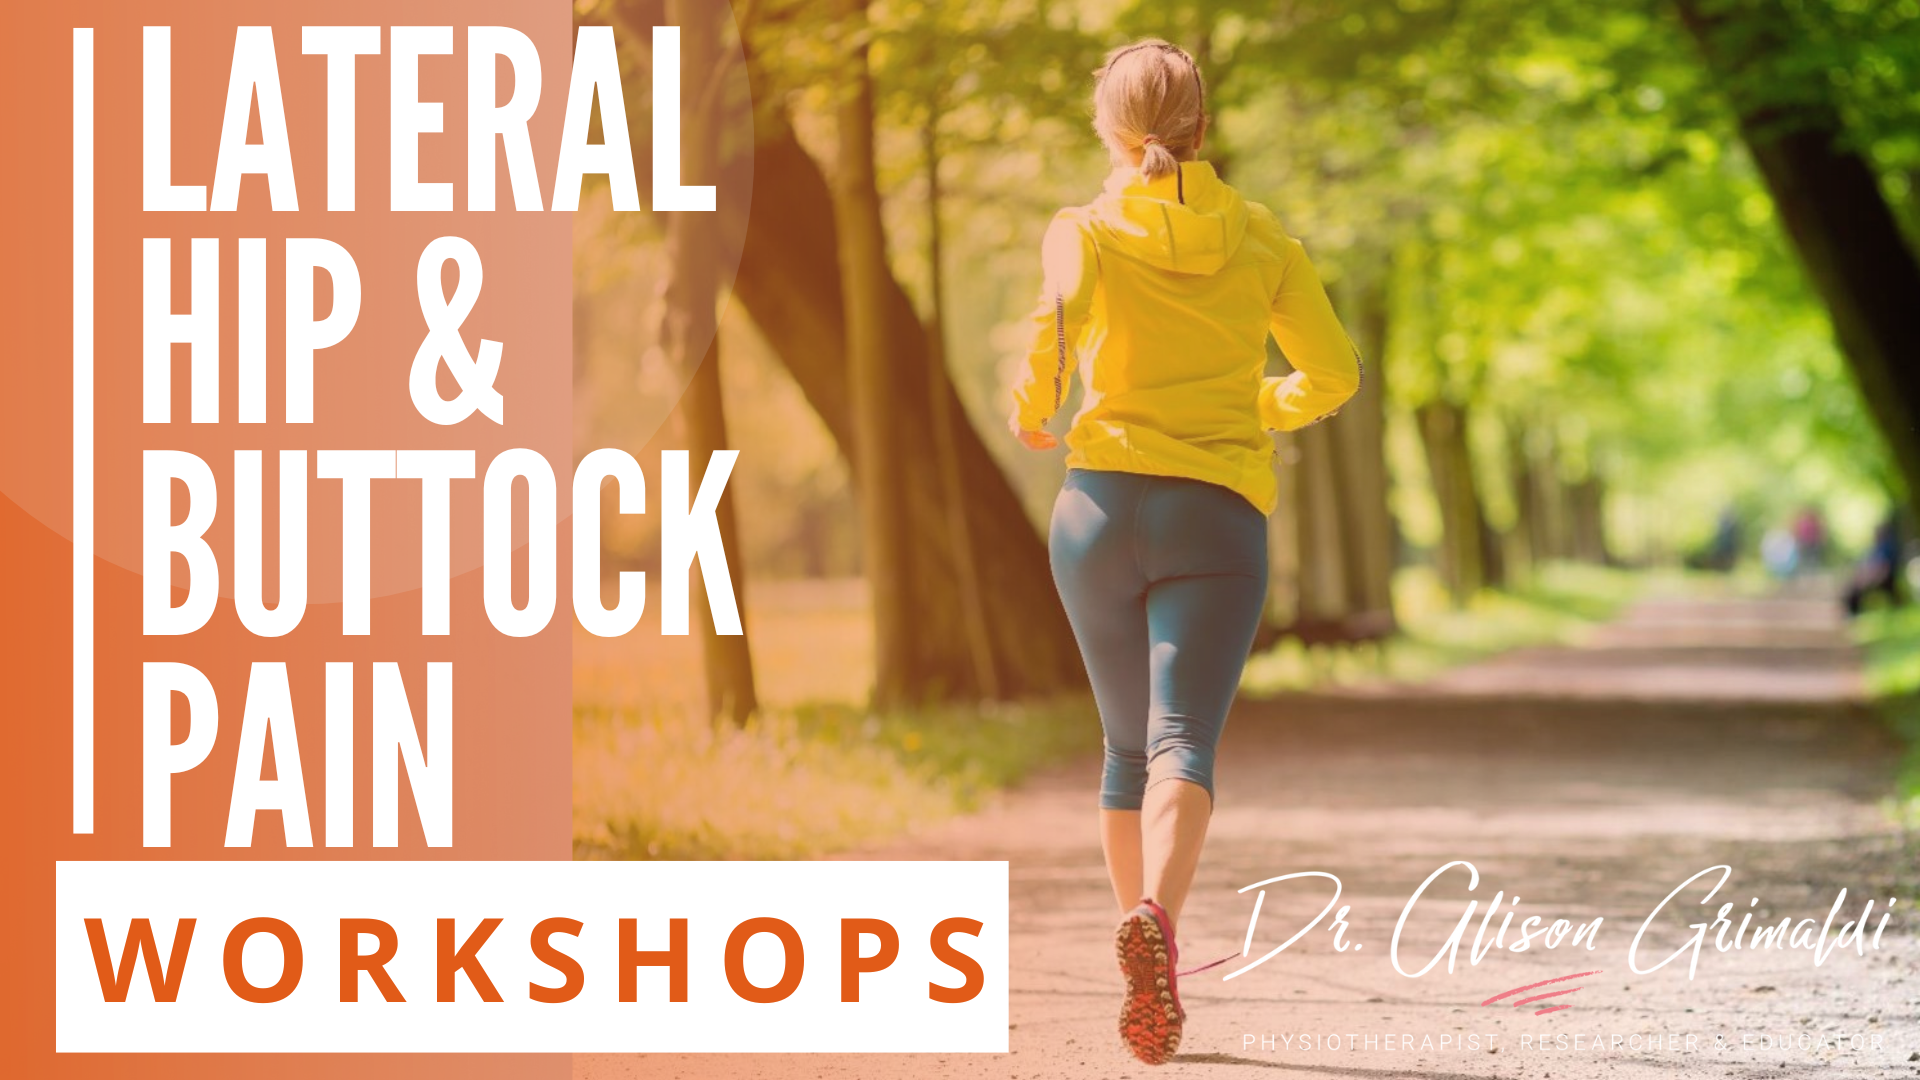 Lateral hip and buttock pain workshops